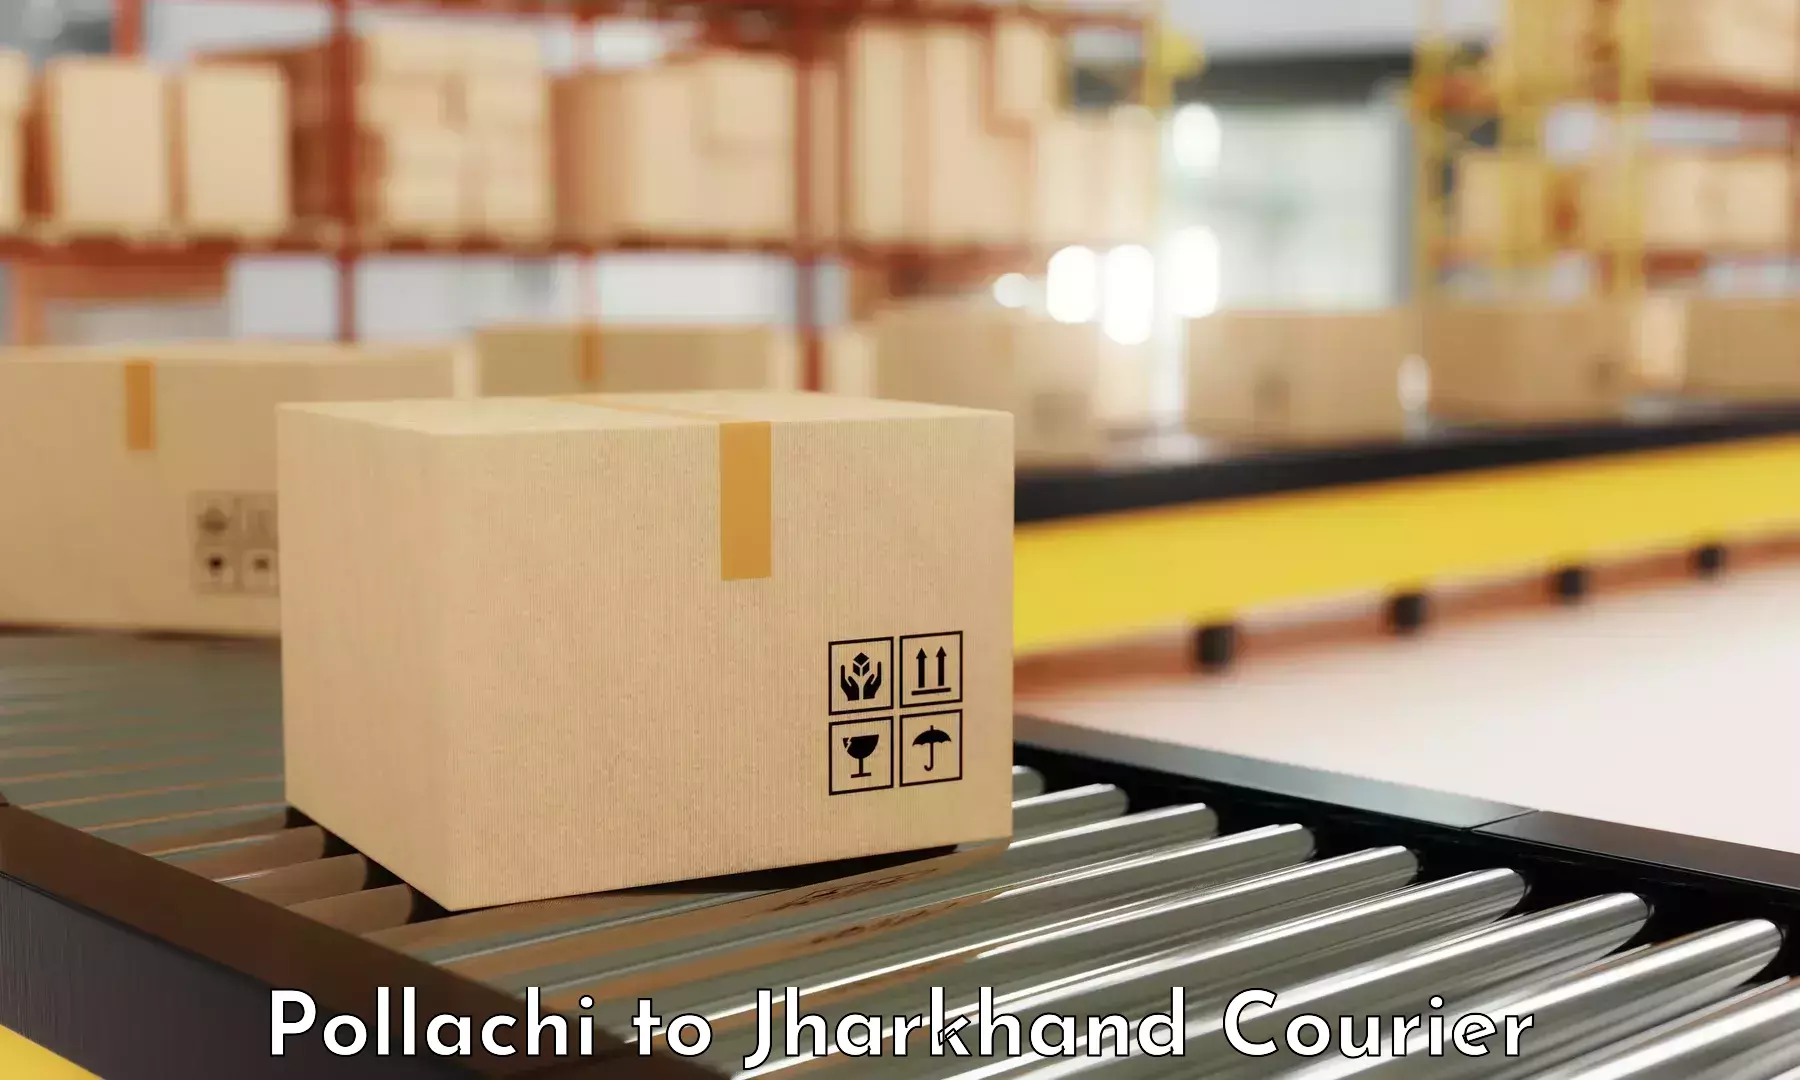 Delivery service partnership Pollachi to Ranchi